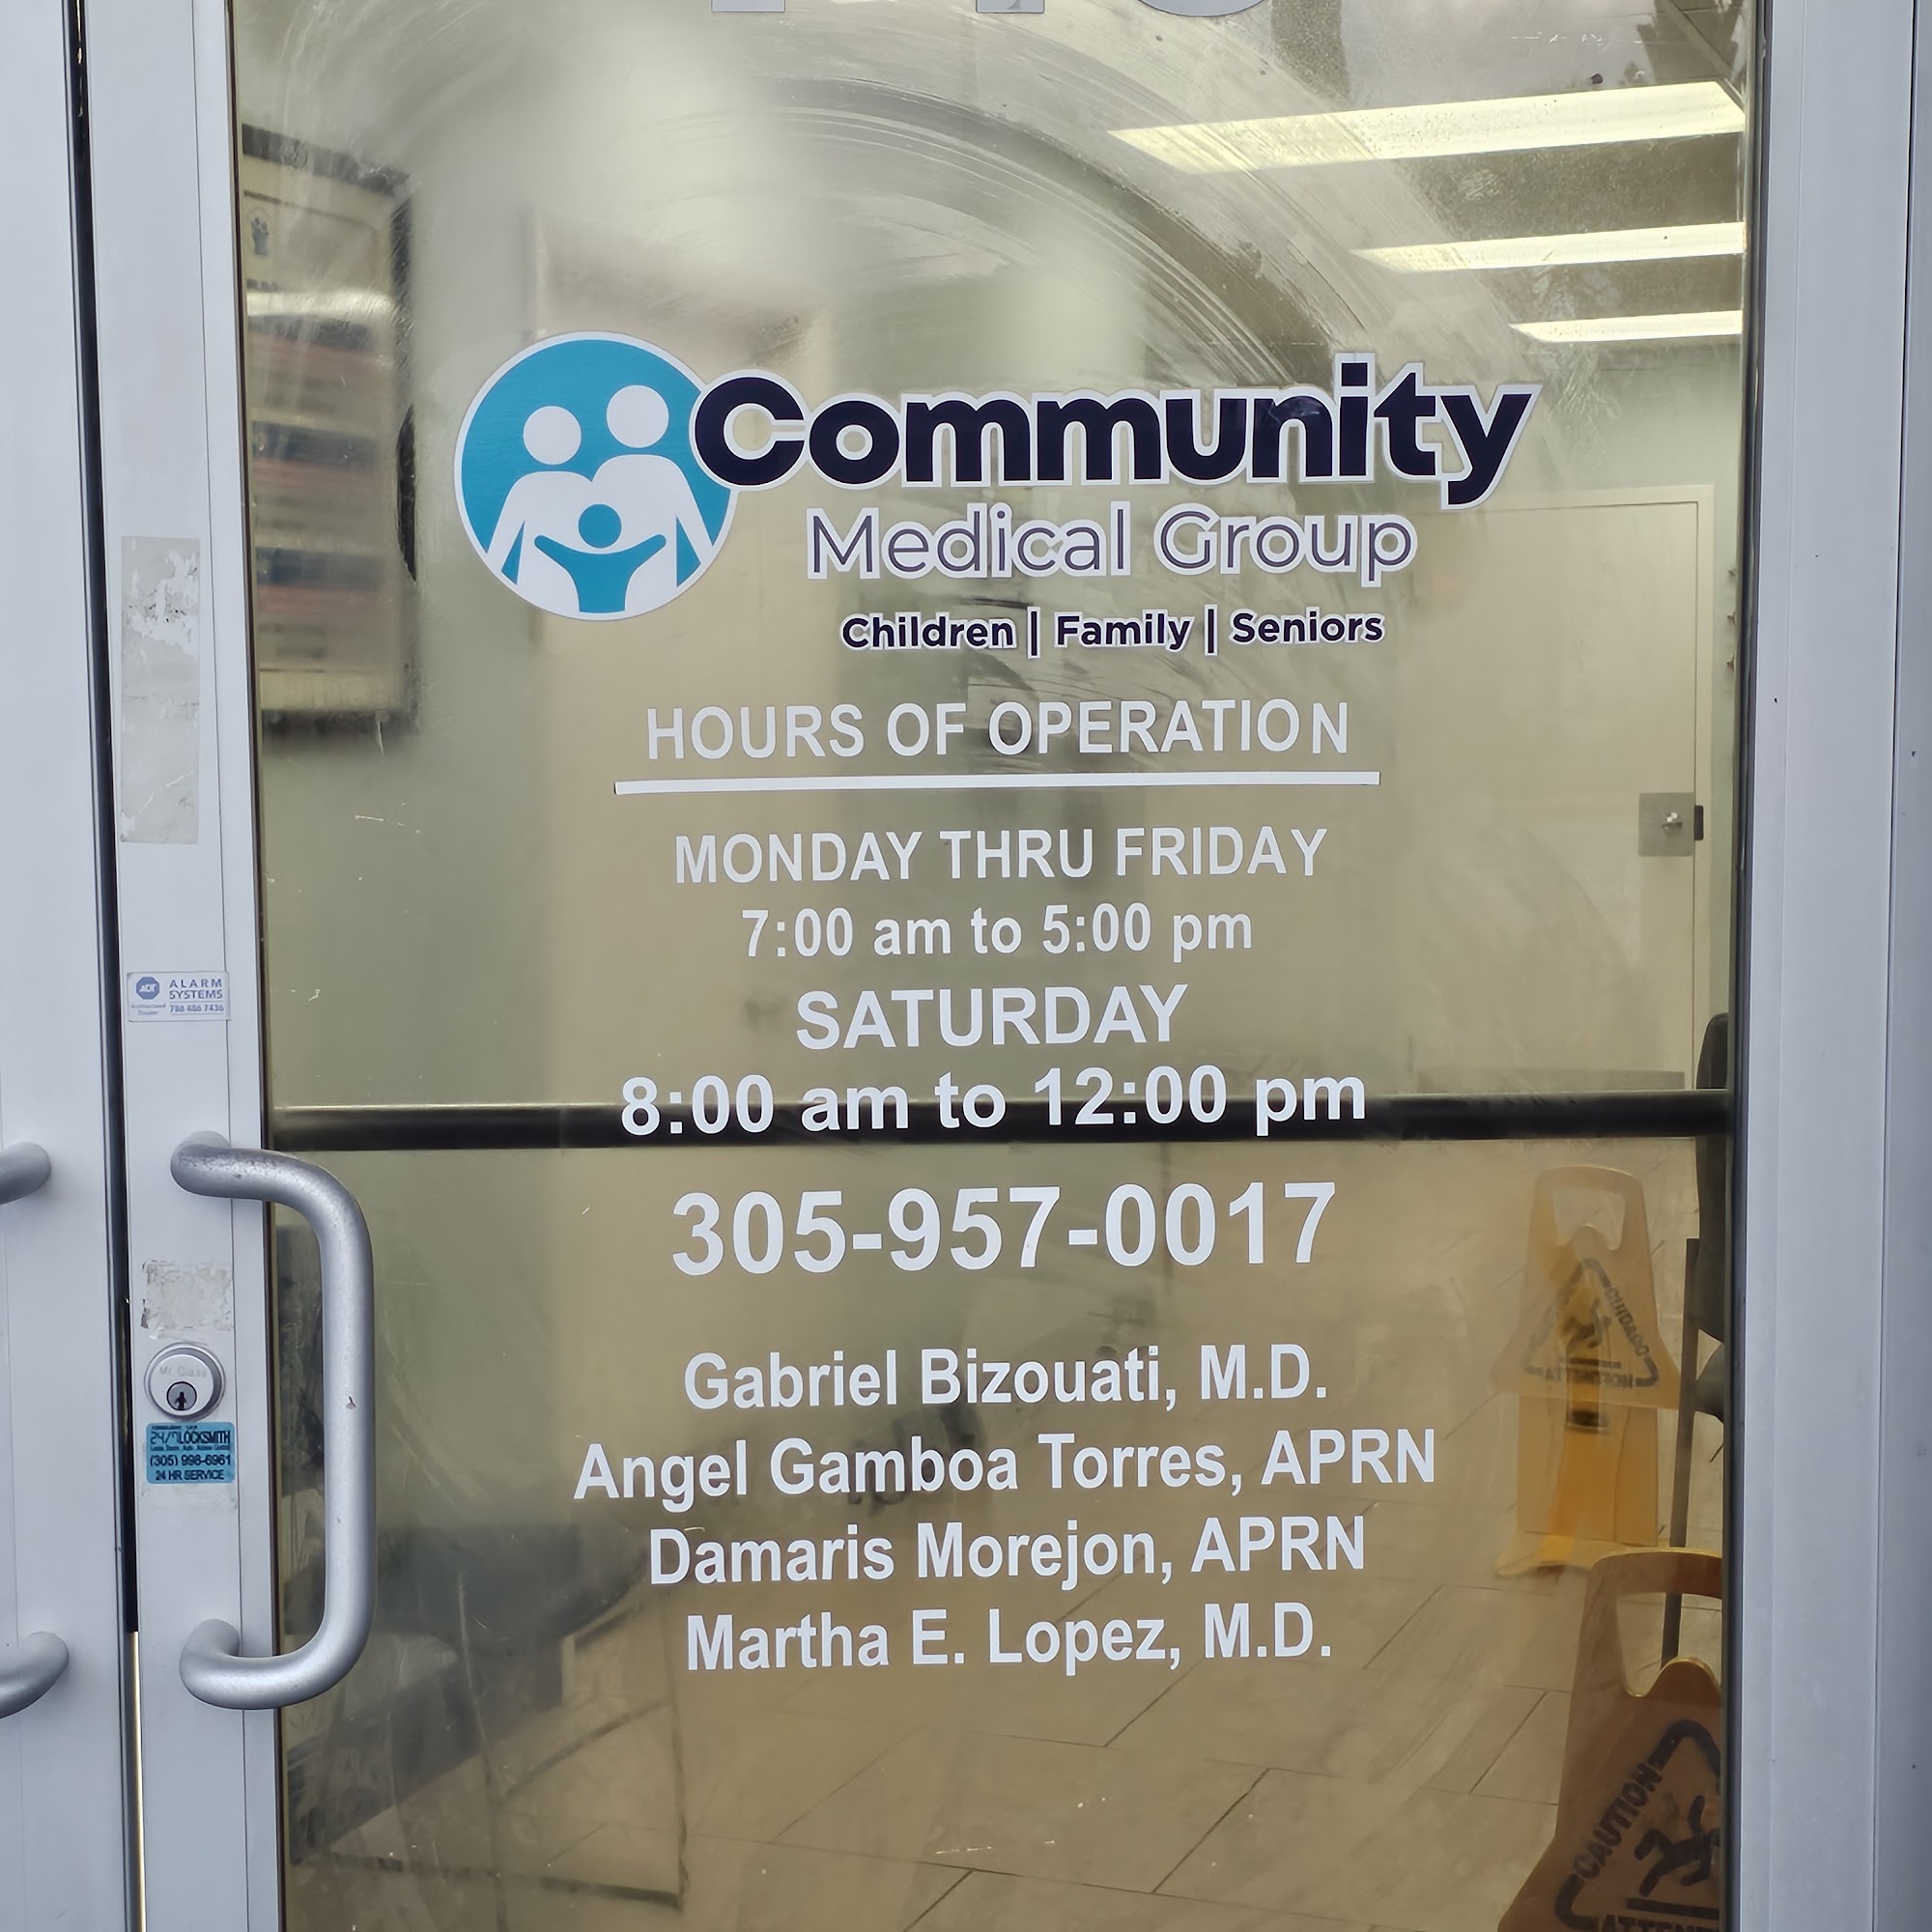 Community Medical Group of North Miami Beach